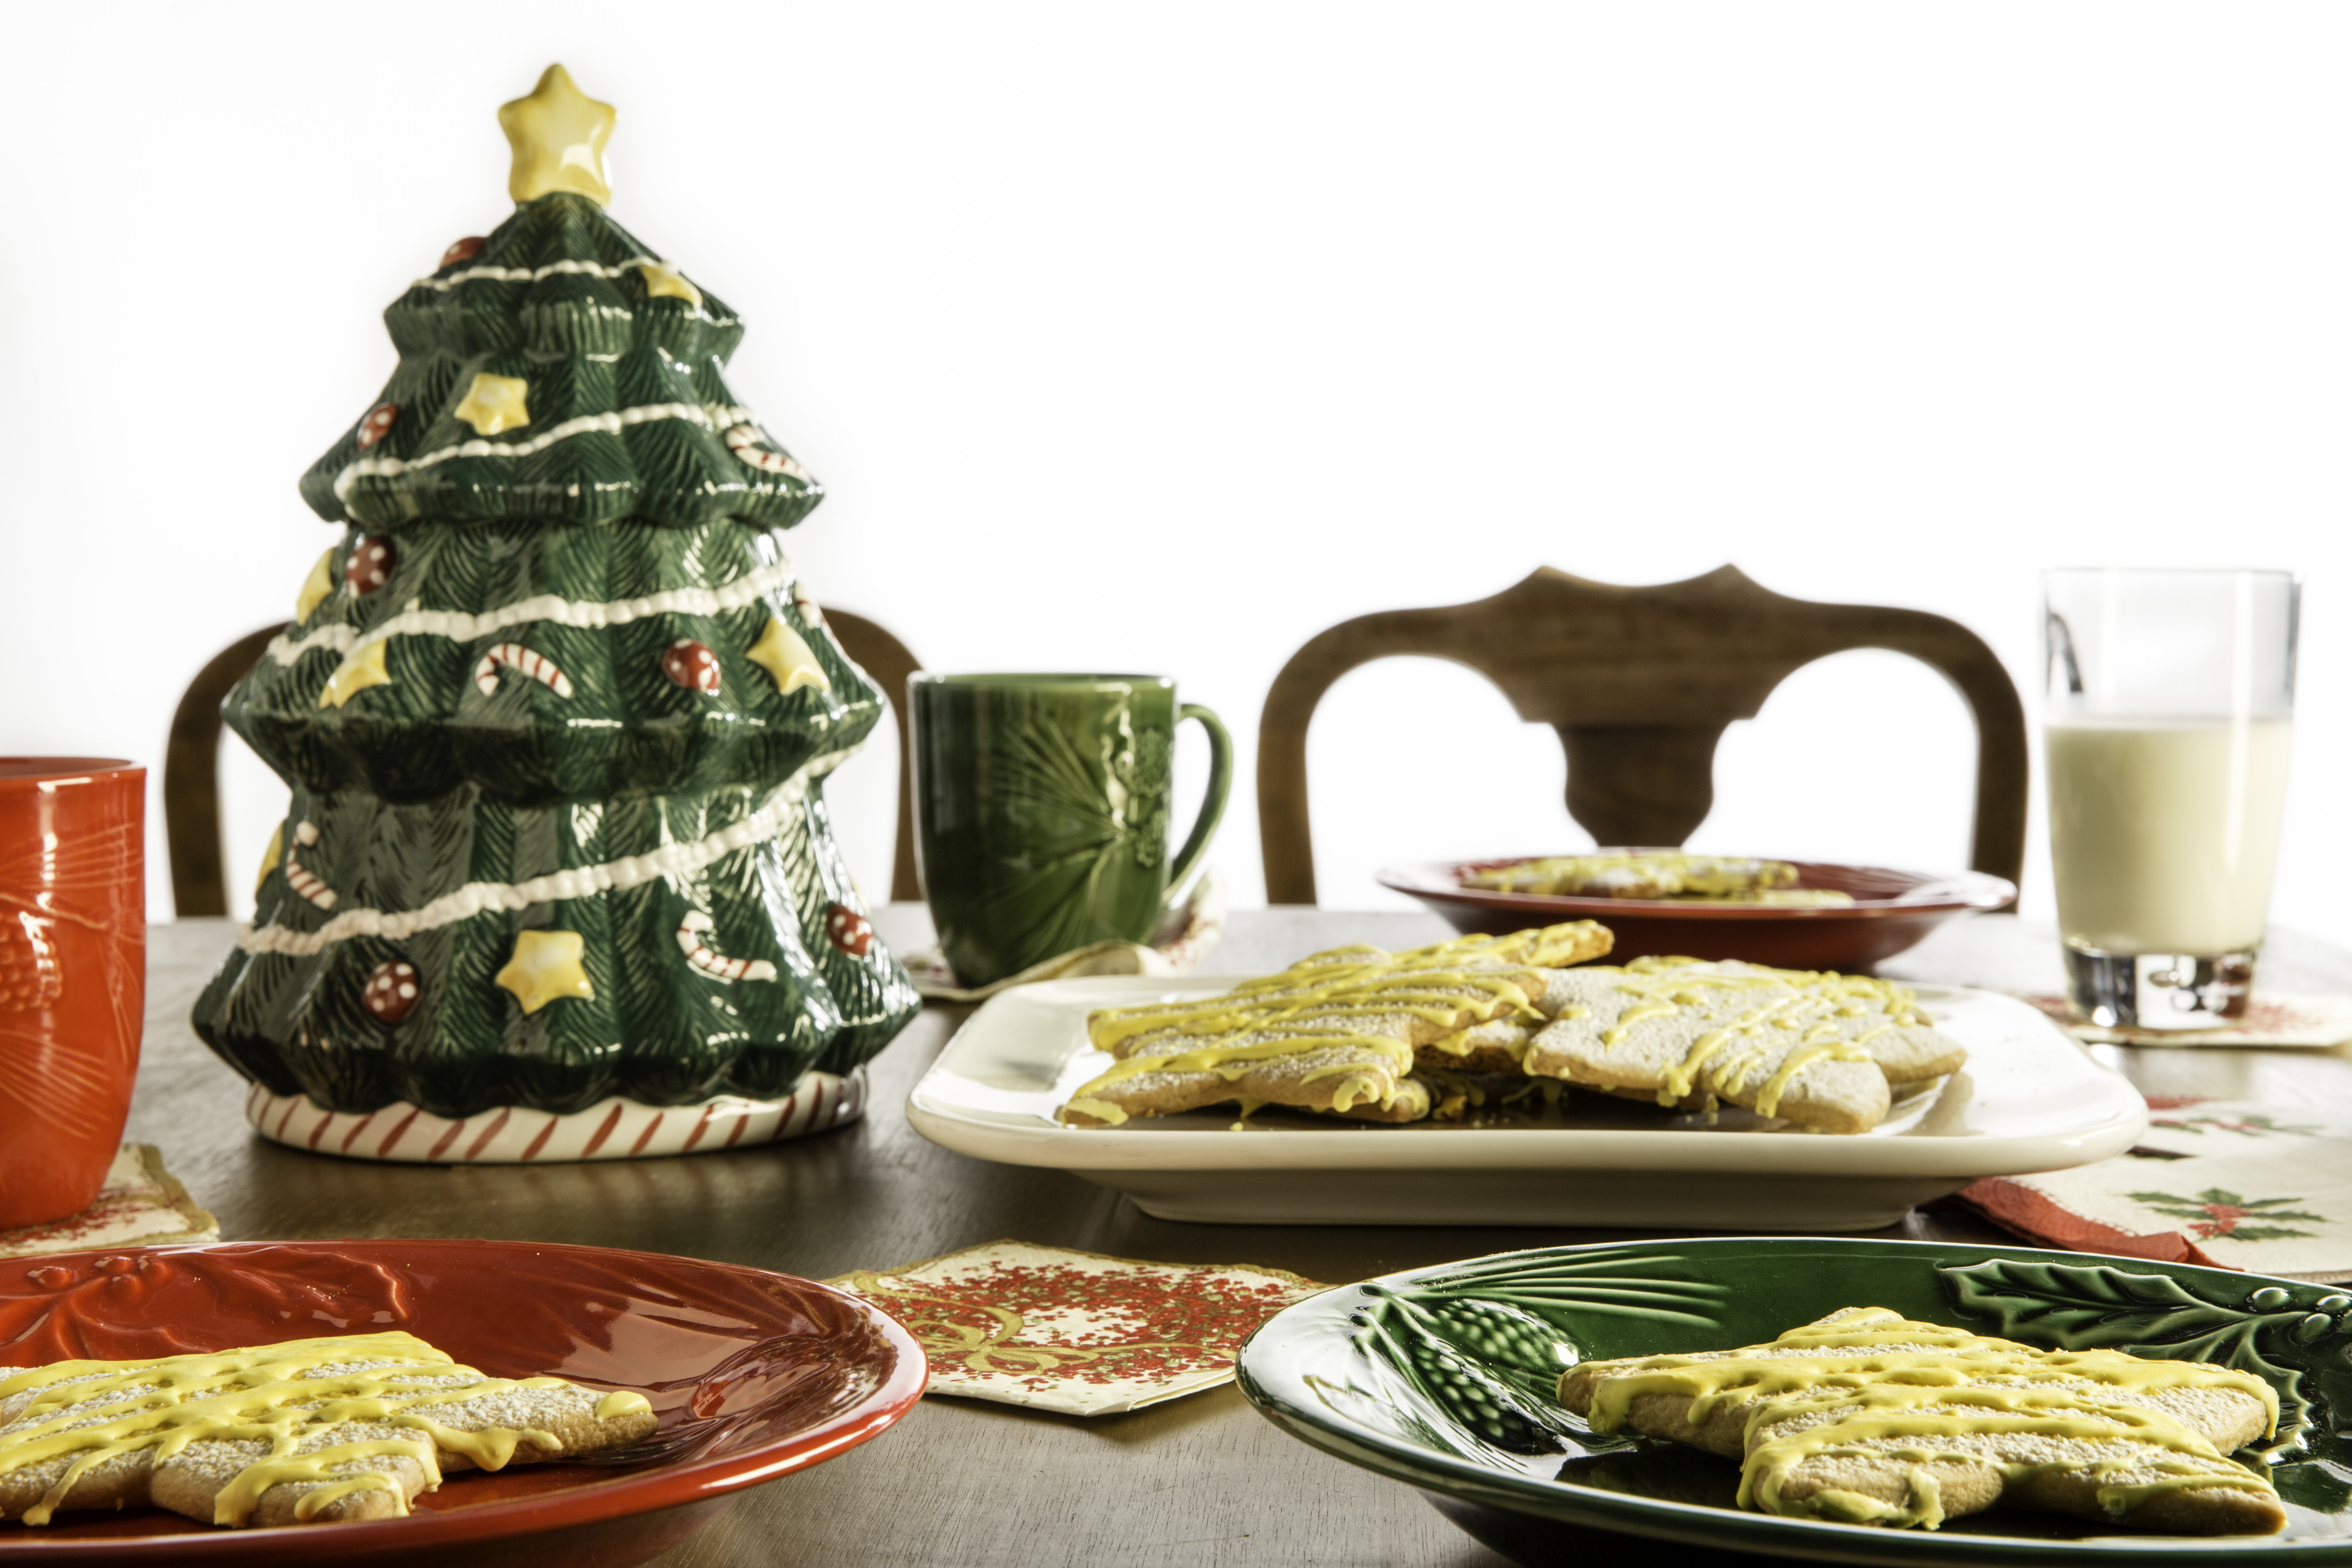 Every Christmas tree is topped with a star—and they’re all different.These uniquely patterned lemon cookies feature a hard lemon glaze and powdered sugar both, which contributes to their appearance.